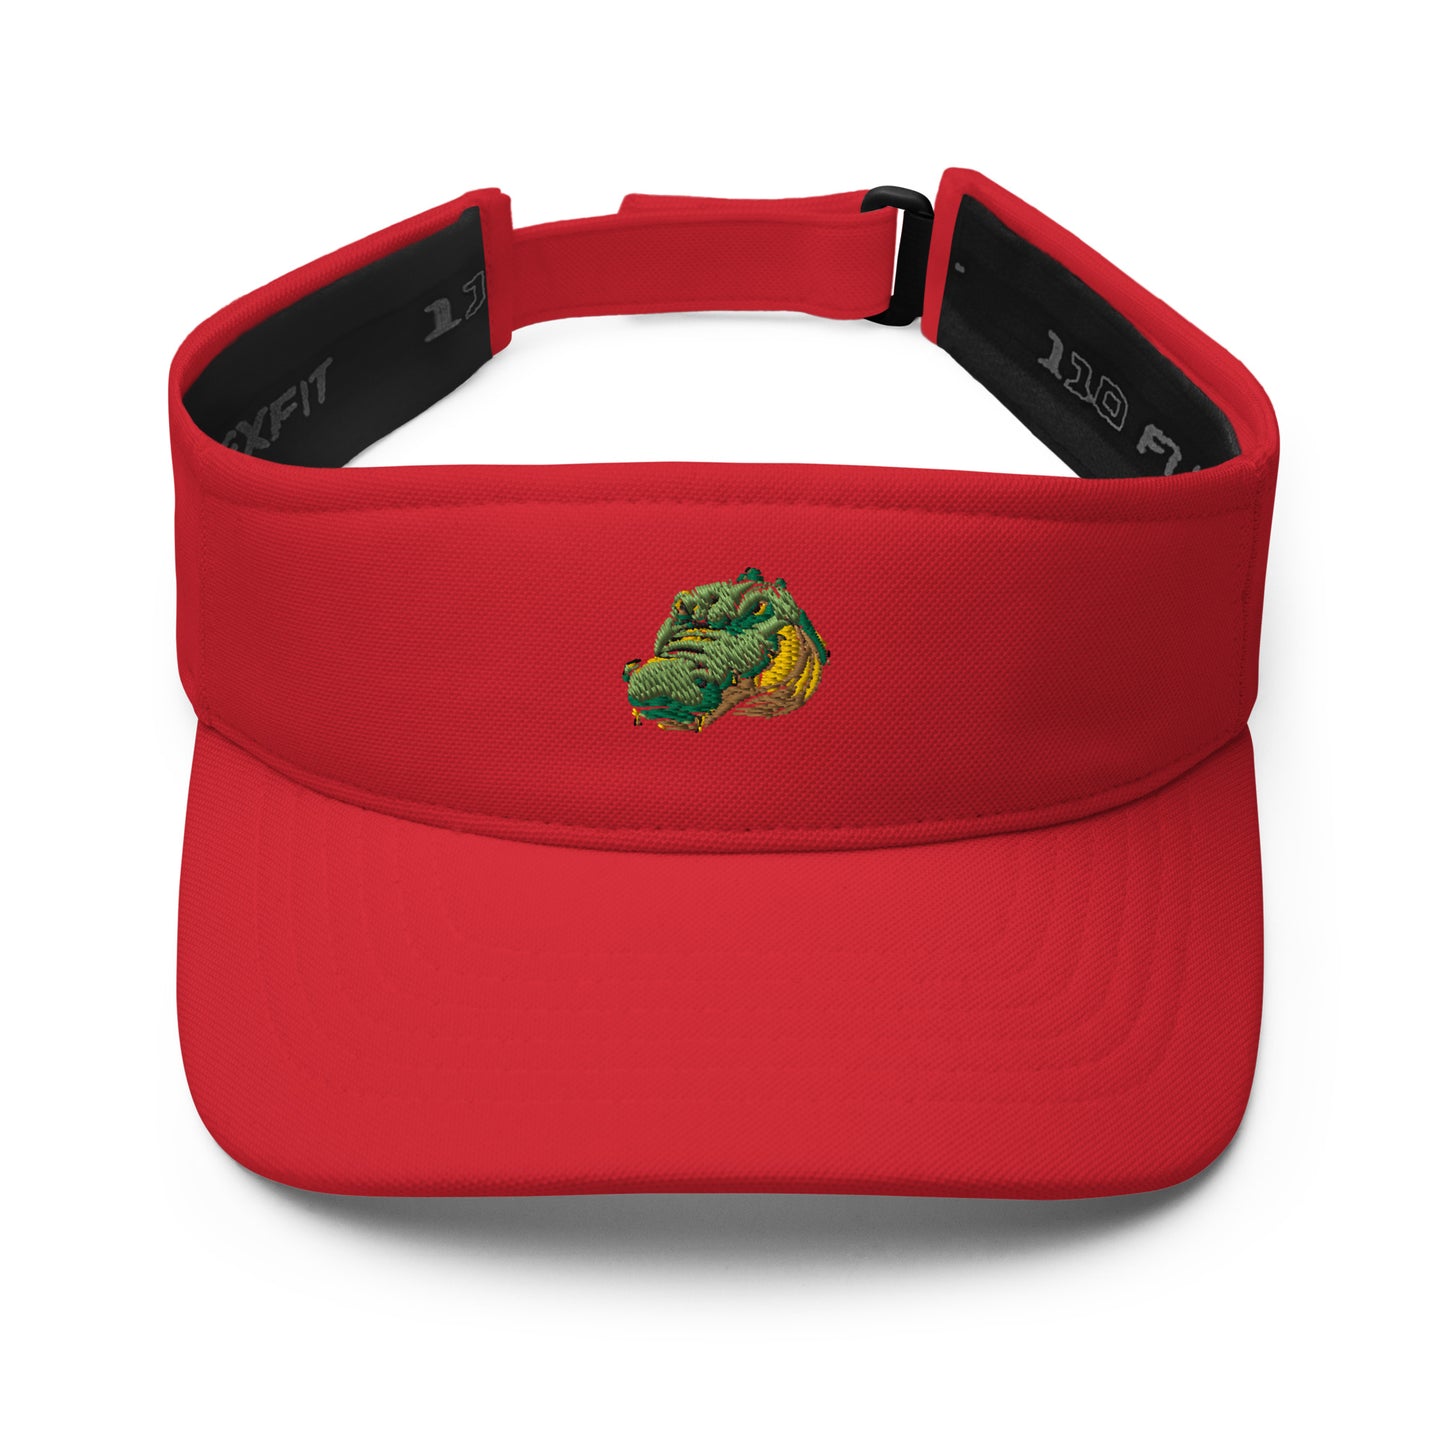 Visor embroidered with a croc